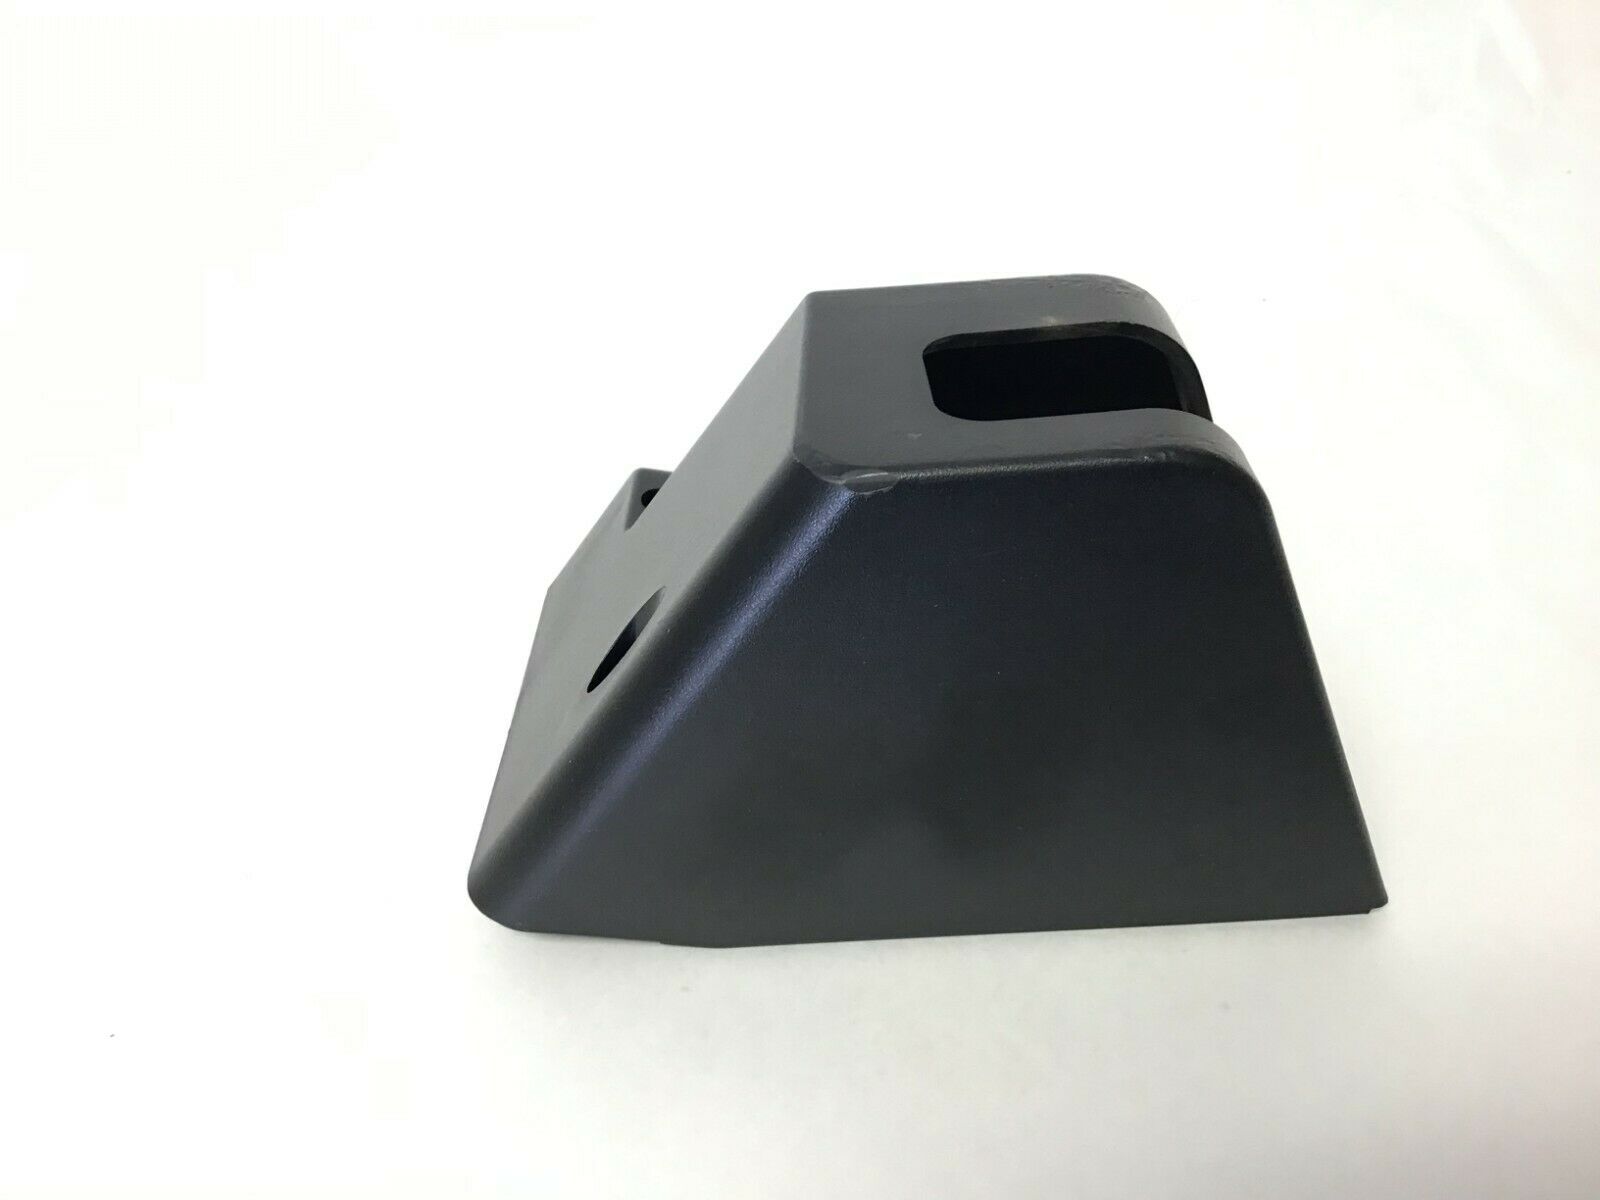 BH Fitness S1Ti Treadmill Left Rear 3756 Foot Cover Endcap (Used)